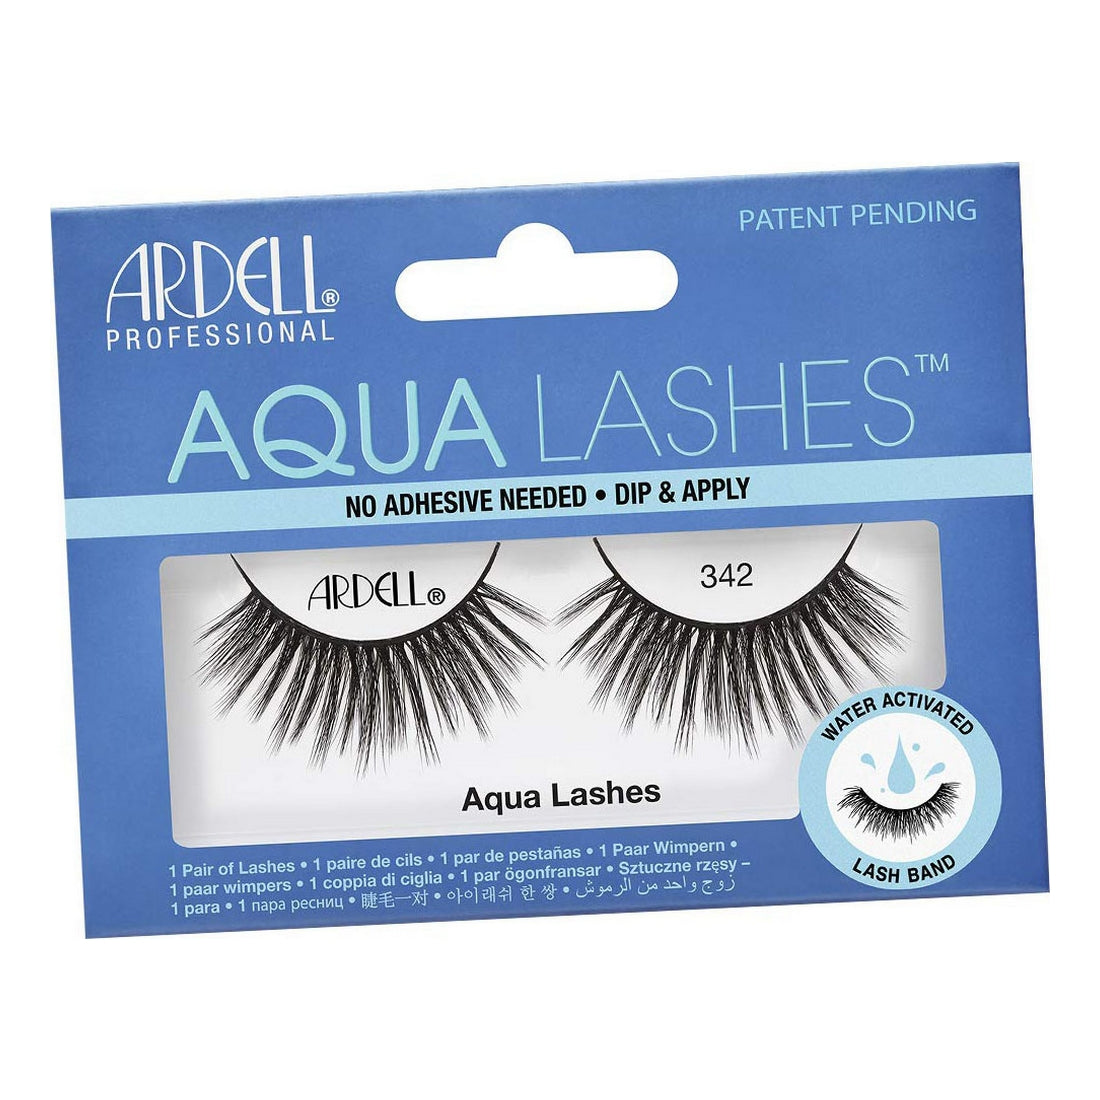 Valse Wimpers Aqua Lashes Ardell 63403 Nº 342